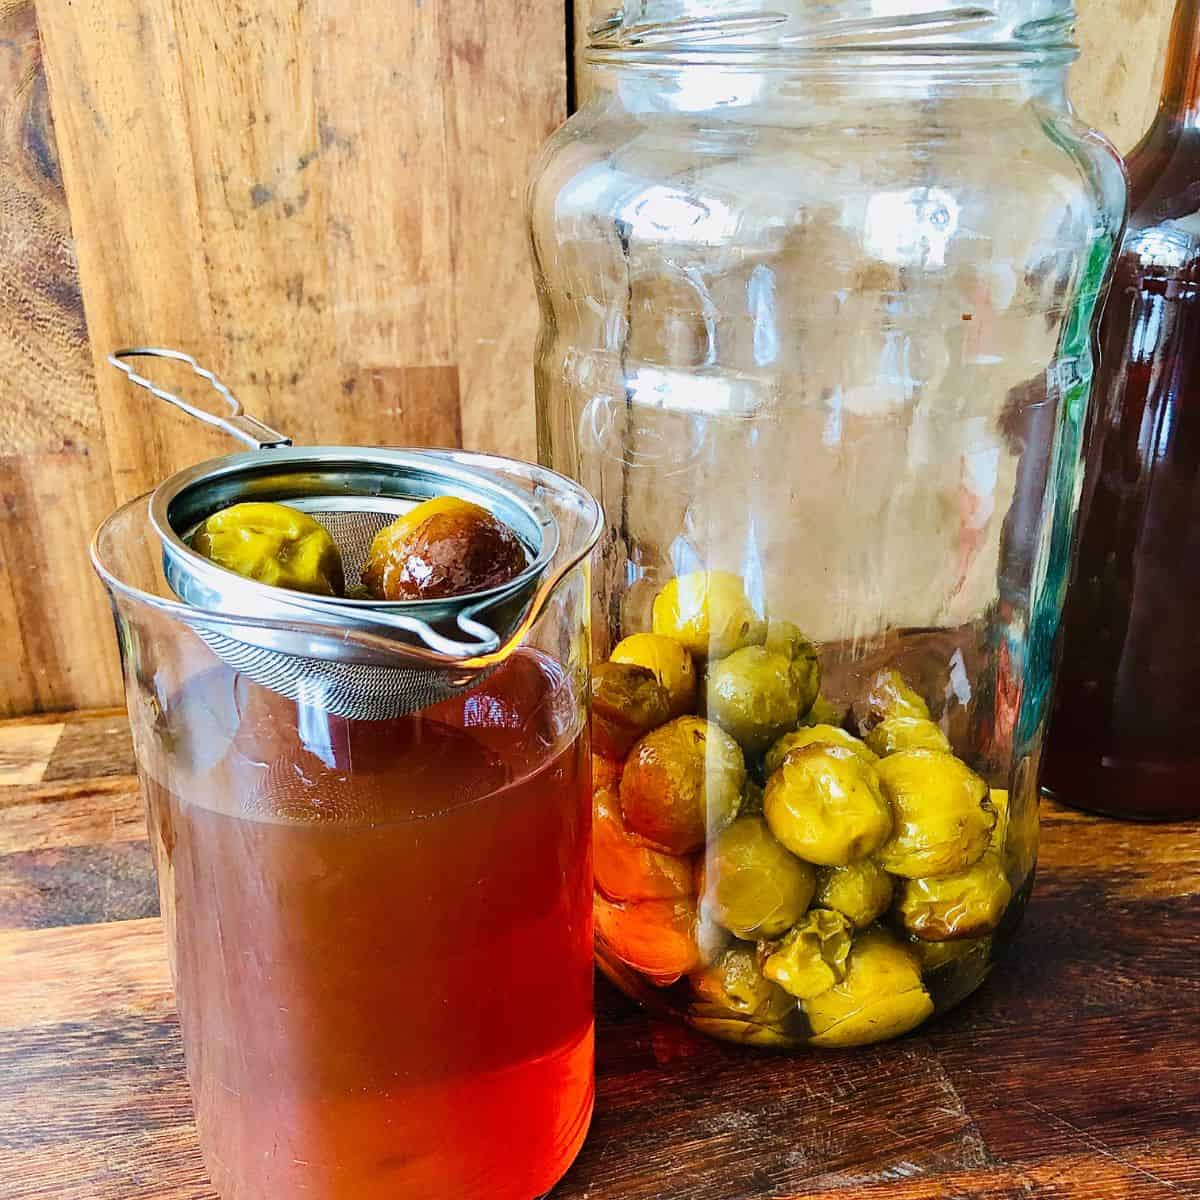 A large jar and a beaker with a strainer on top. The large jar contains alcohol infused greengages. The beaker contains strained plum wine.